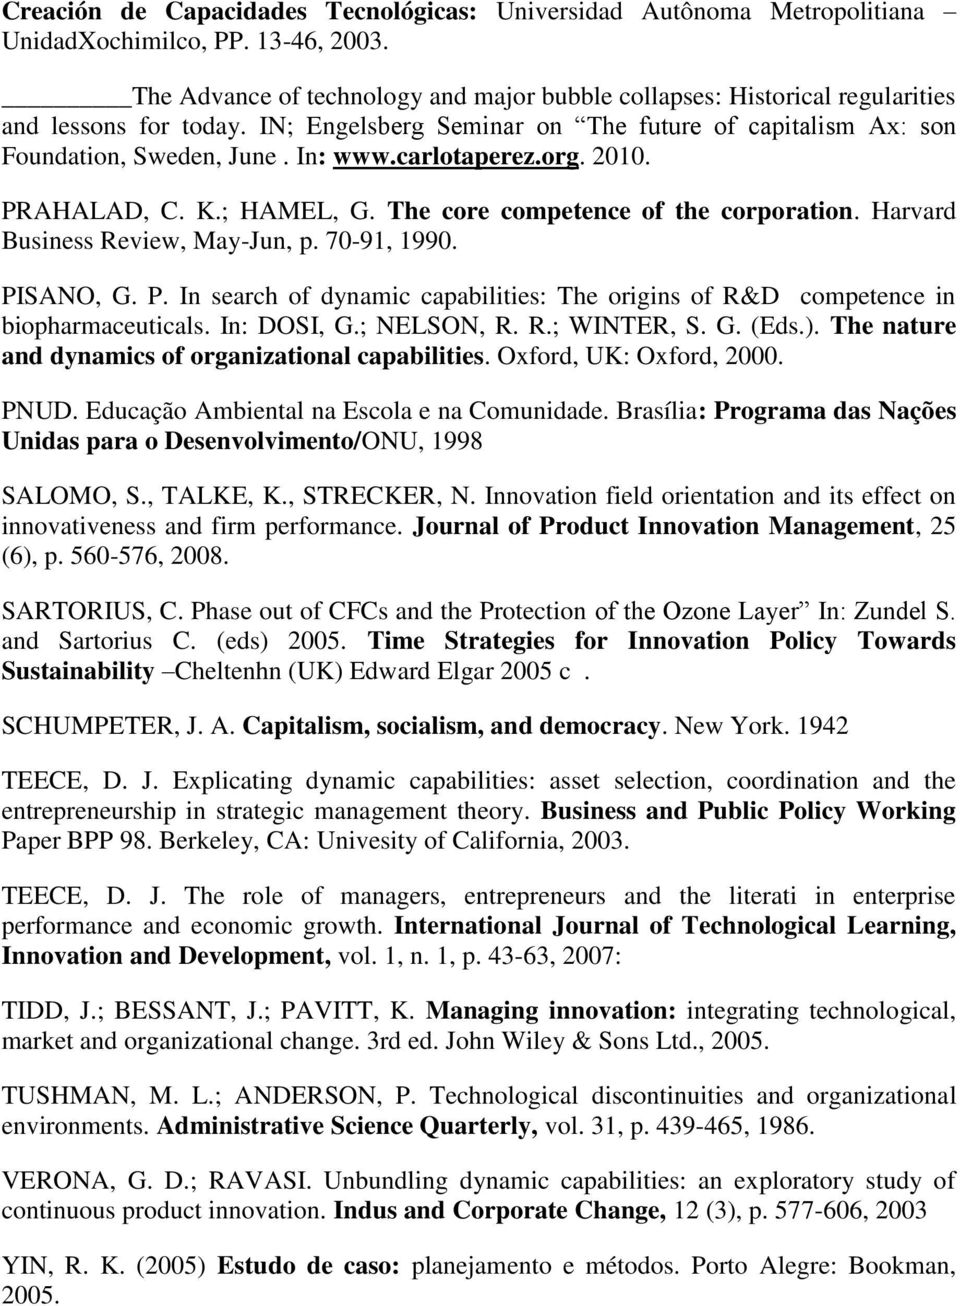 carlotaperez.org. 2010. PRAHALAD, C. K.; HAMEL, G. The core competence of the corporation. Harvard Business Review, May-Jun, p. 70-91, 1990. PISANO, G. P. In search of dynamic capabilities: The origins of R&D competence in biopharmaceuticals.